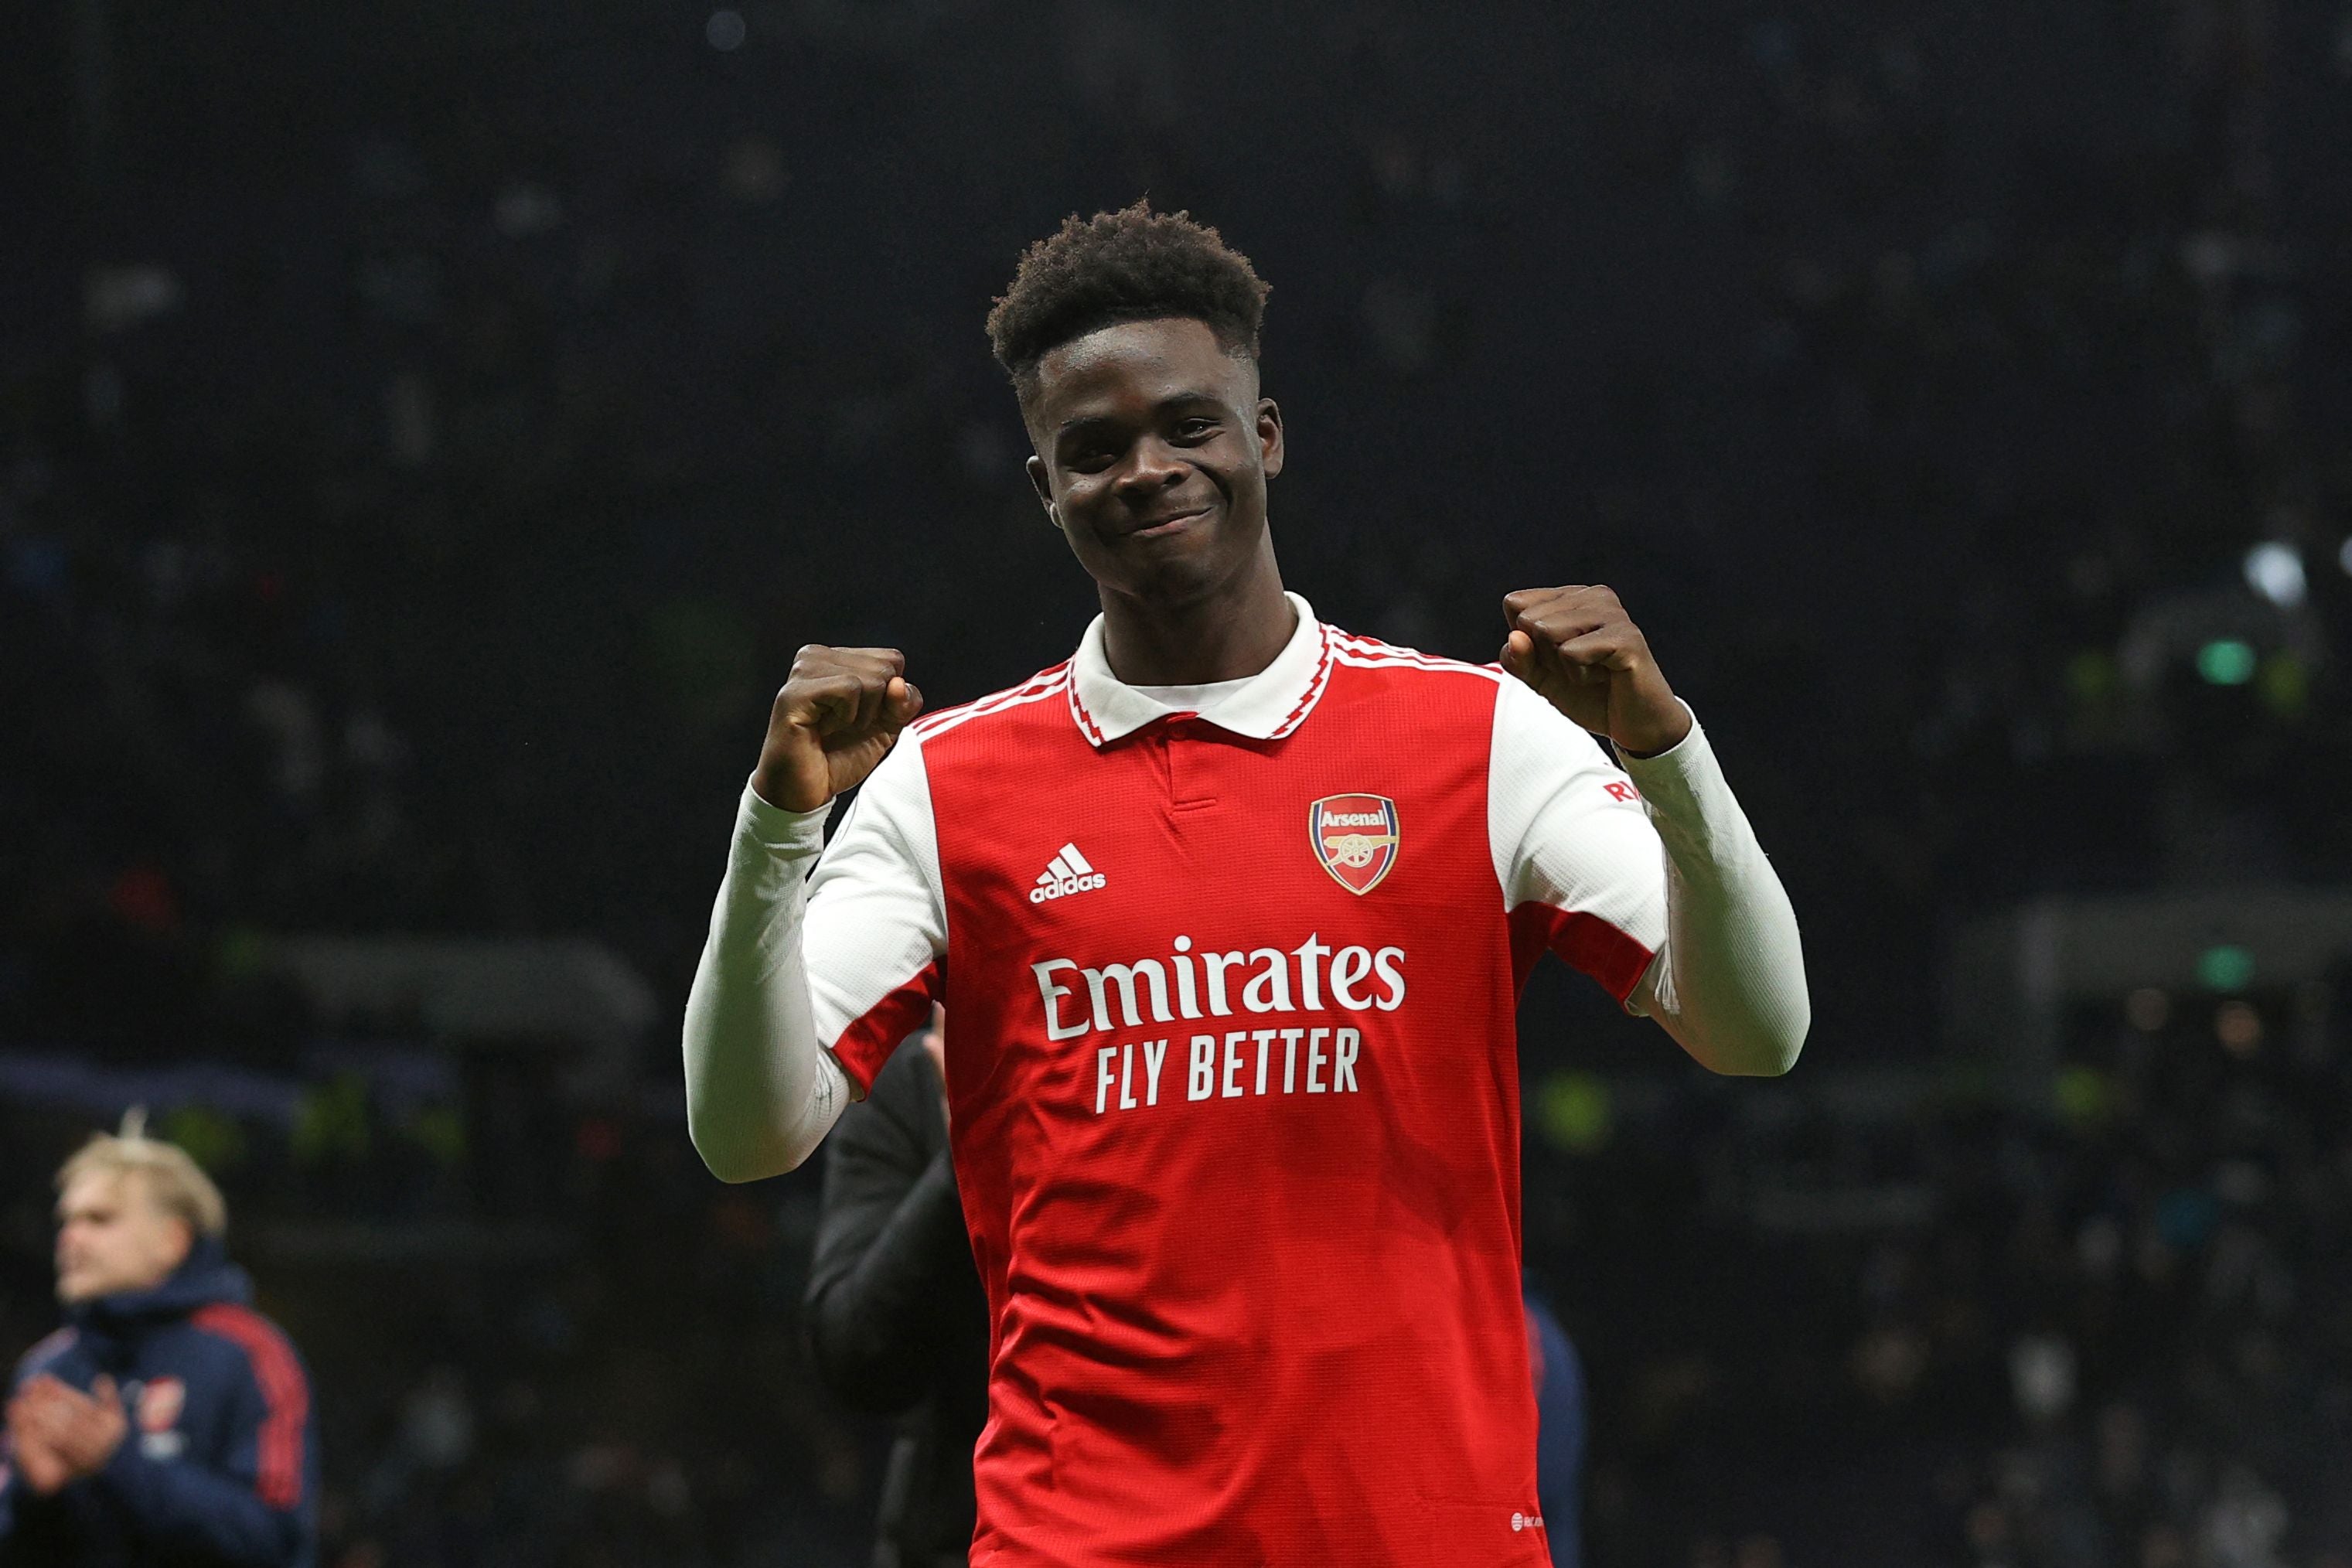 Saka has helped Arsenal move into contention for a Premier League title this year